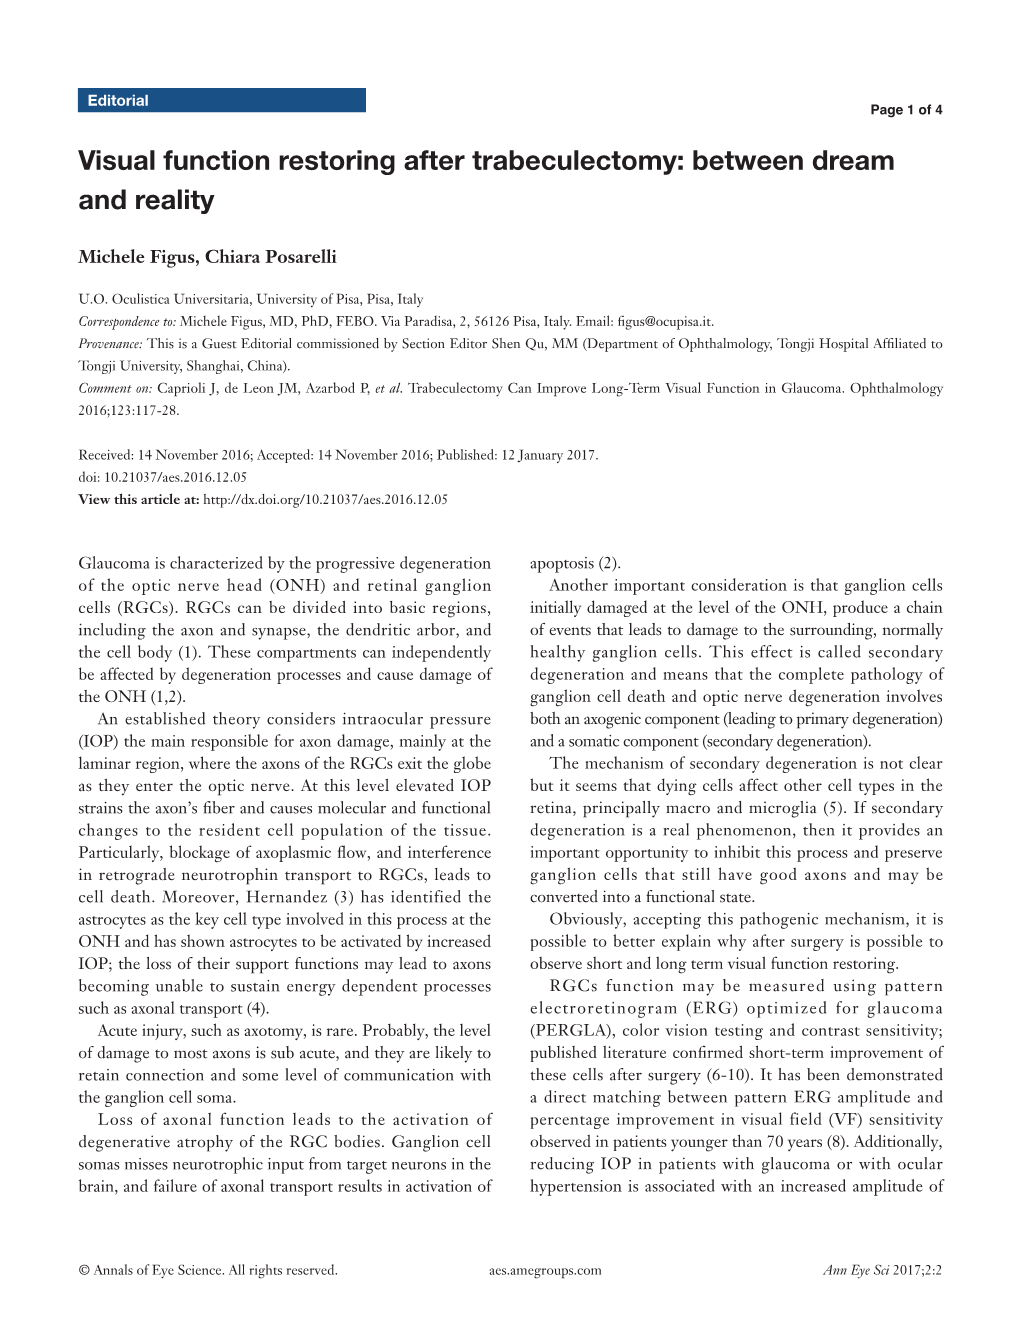 Visual Function Restoring After Trabeculectomy: Between Dream and Reality